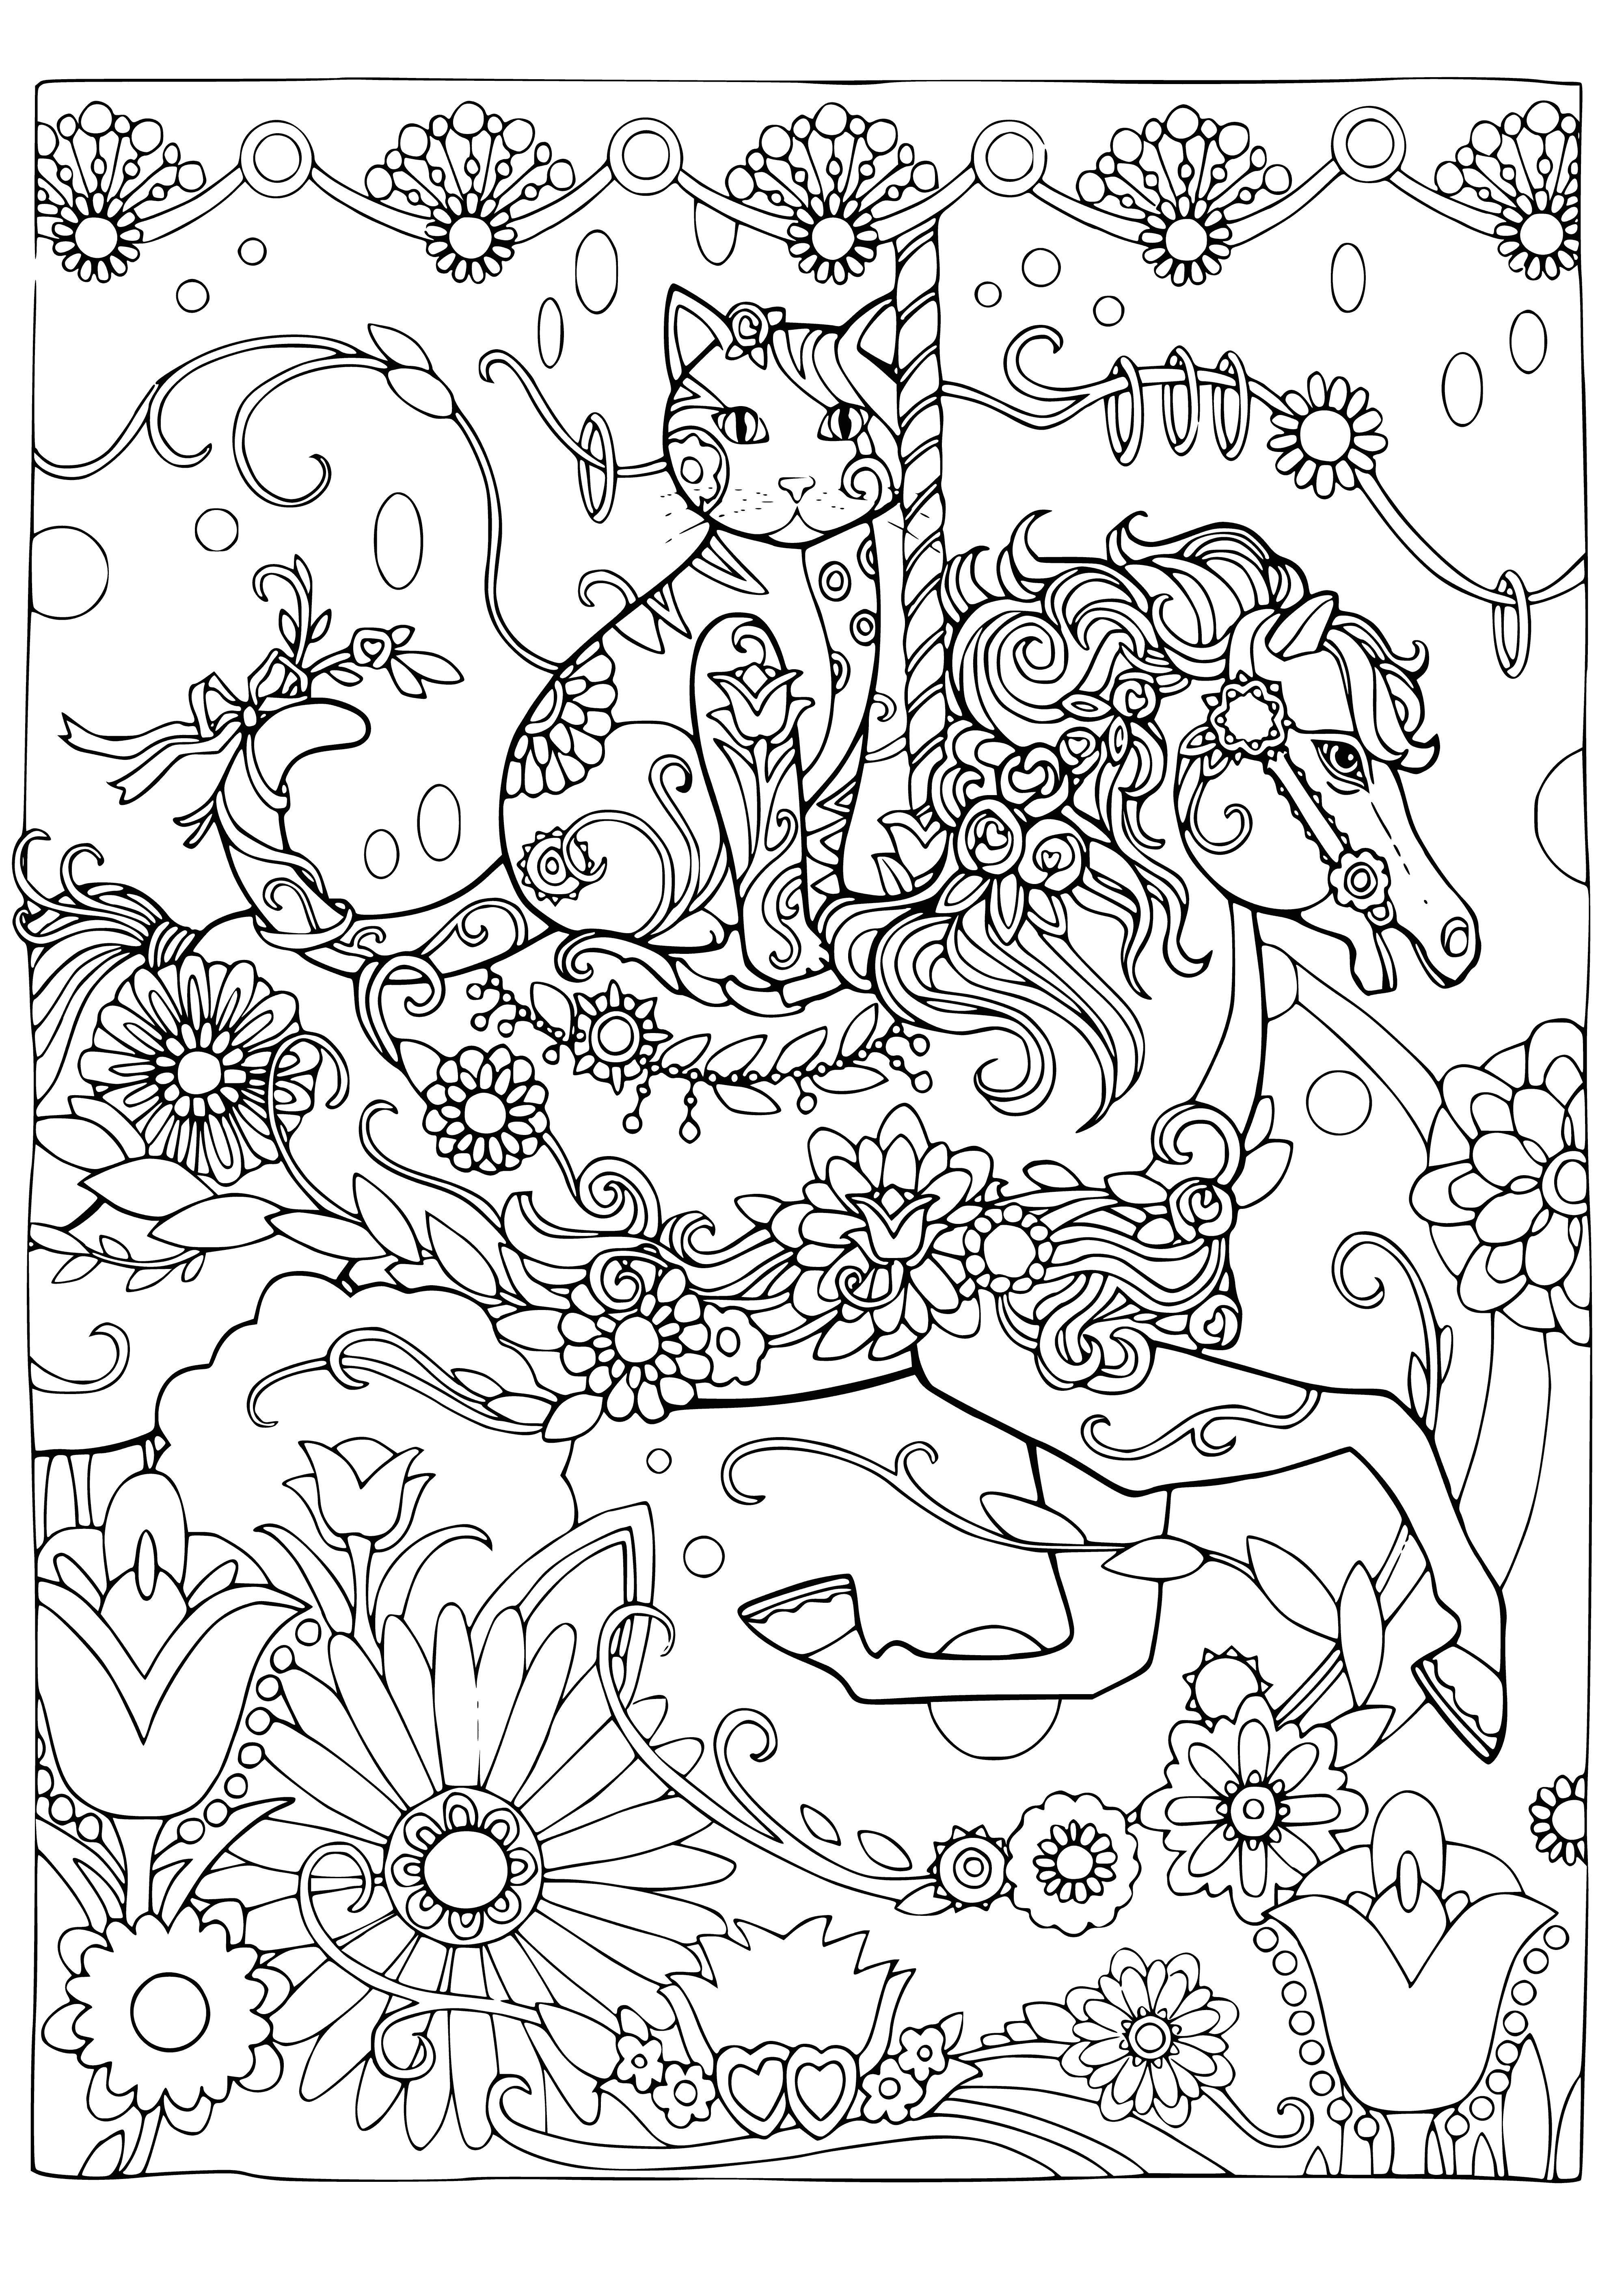 Carousel coloring page